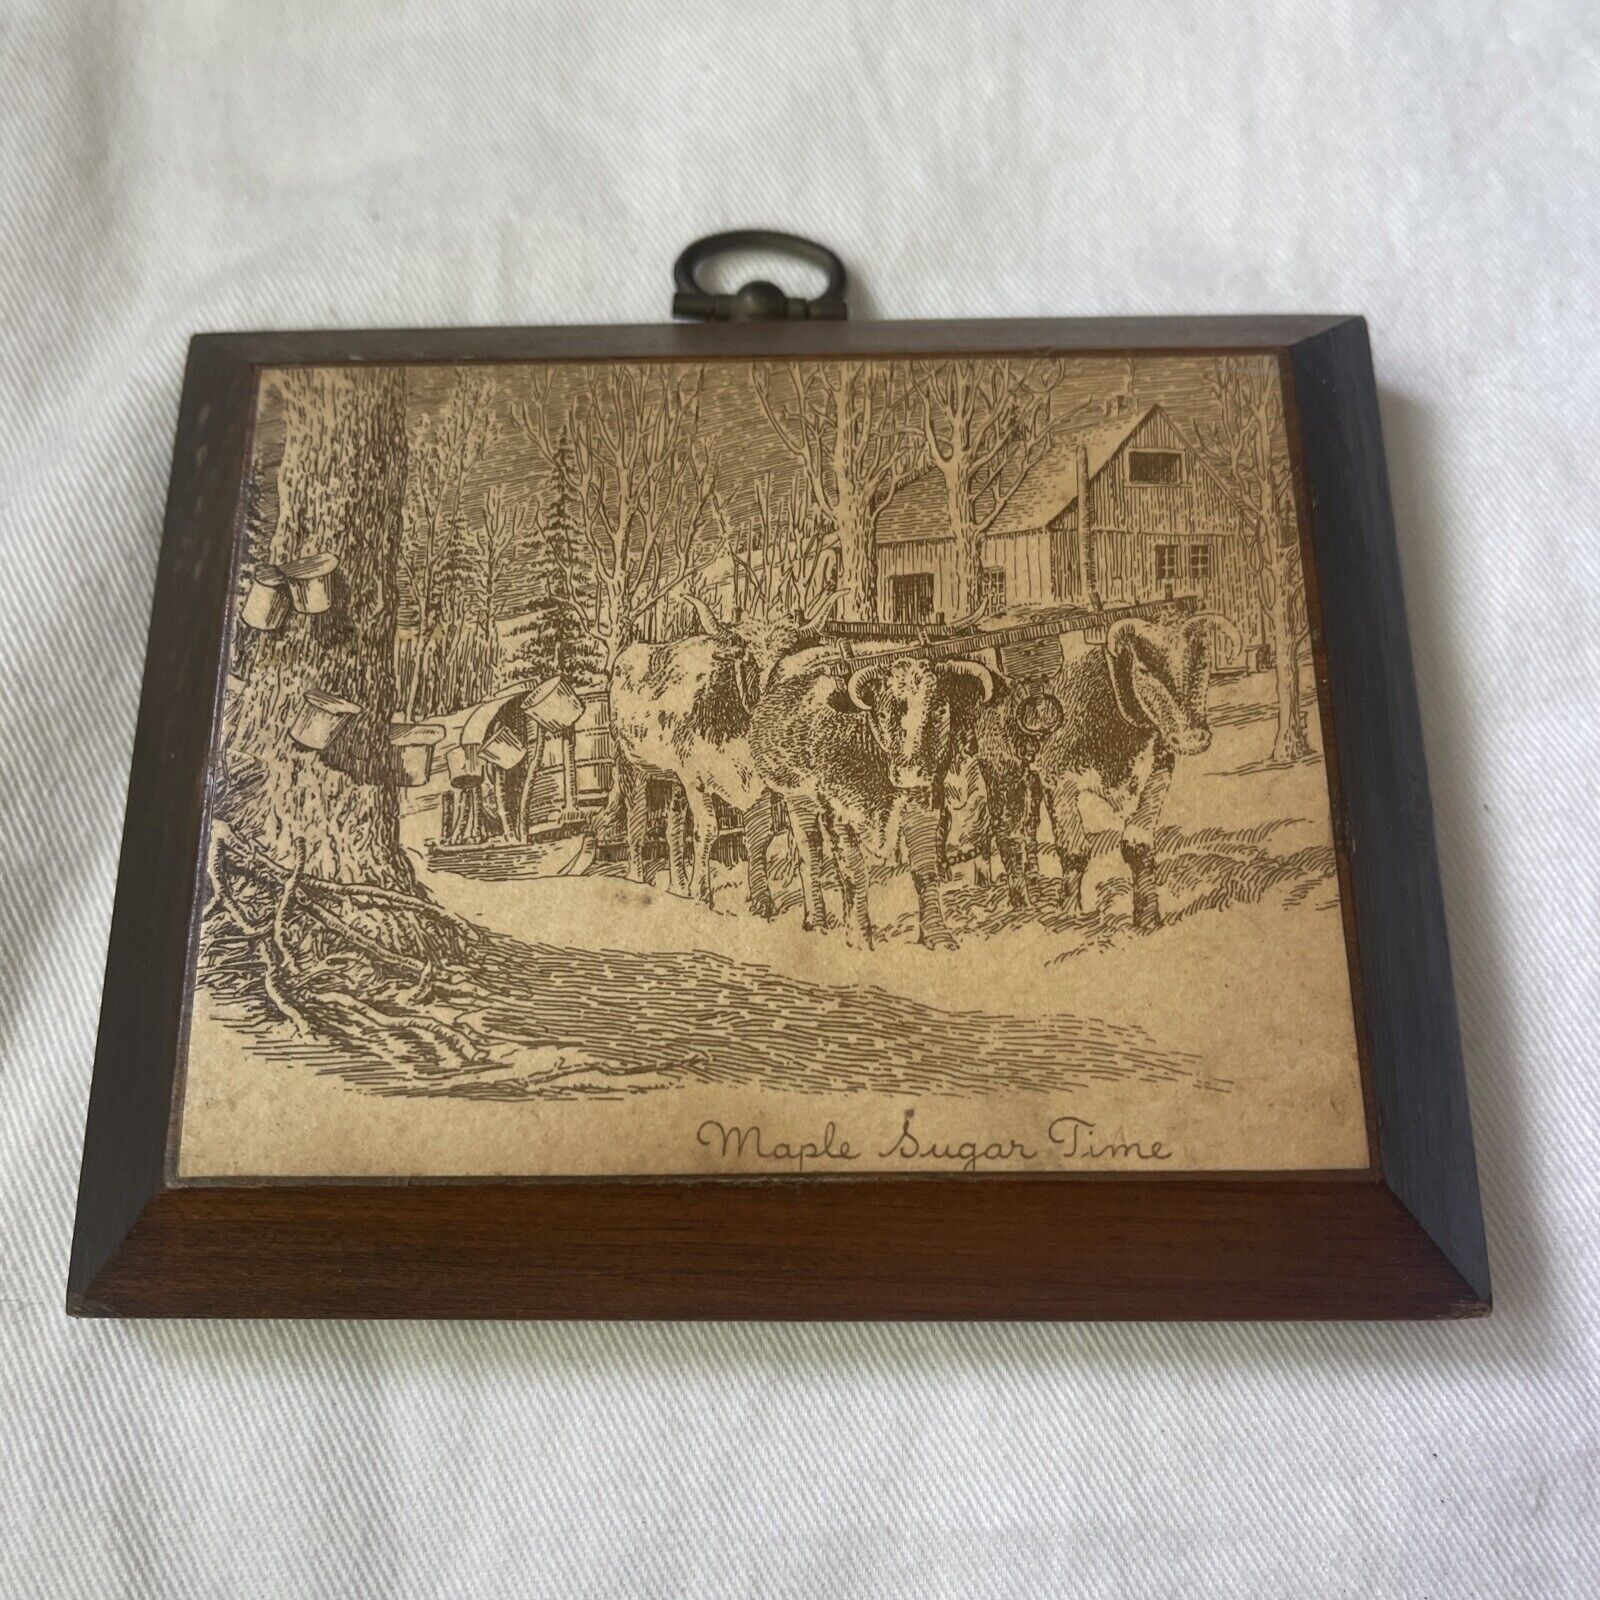 Vintage/Antique Miniature Picture of Maple Sugar Time-5”x4”Laminate on Wood